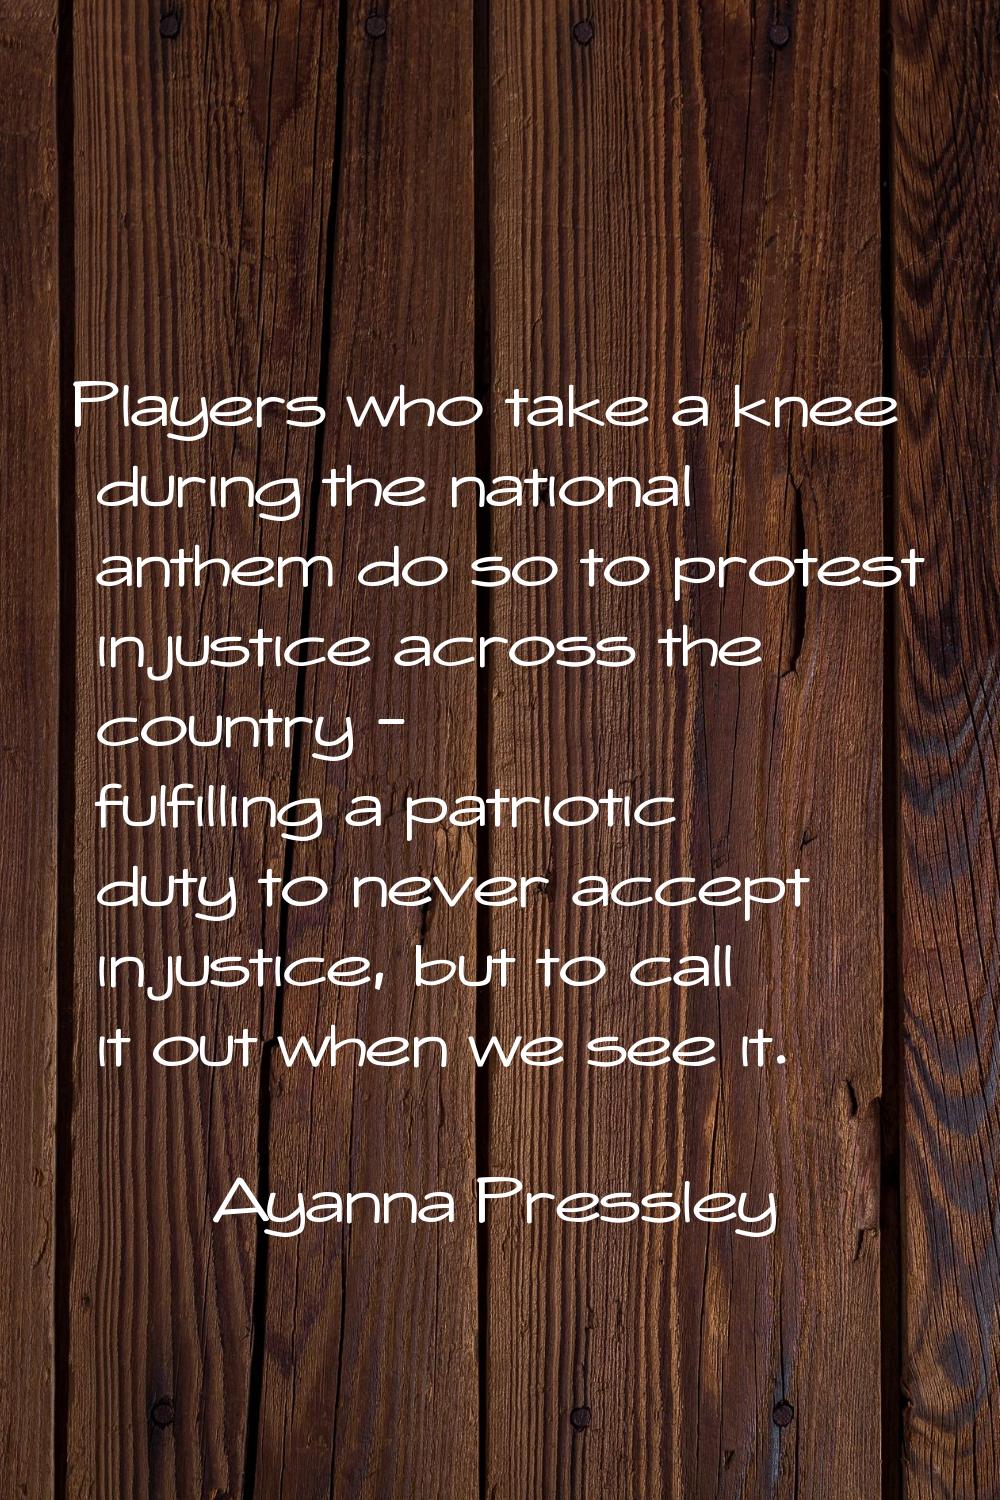 Players who take a knee during the national anthem do so to protest injustice across the country - 